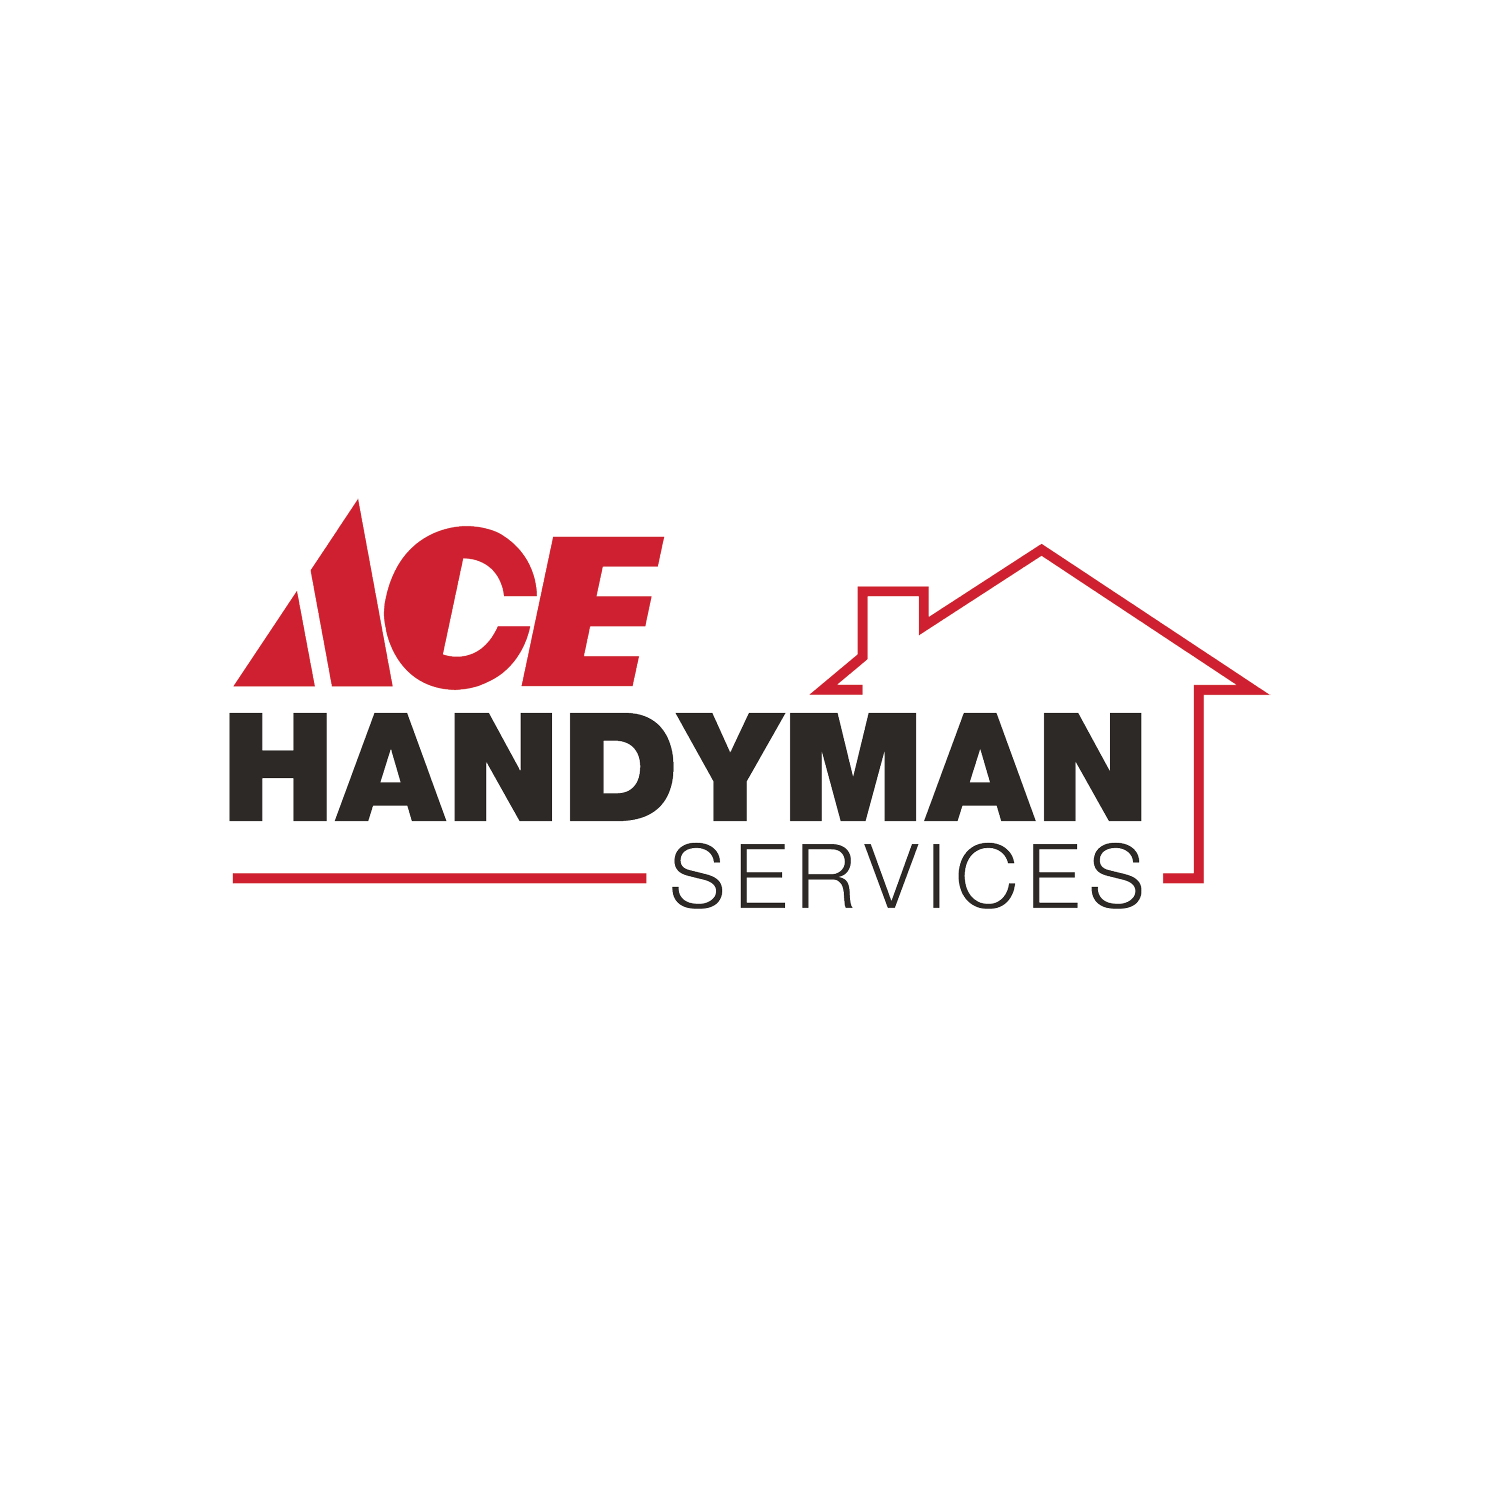 Ace Handyman Services Westchester County and Greenwich 428 Main St Suite 203, Armonk New York 10504